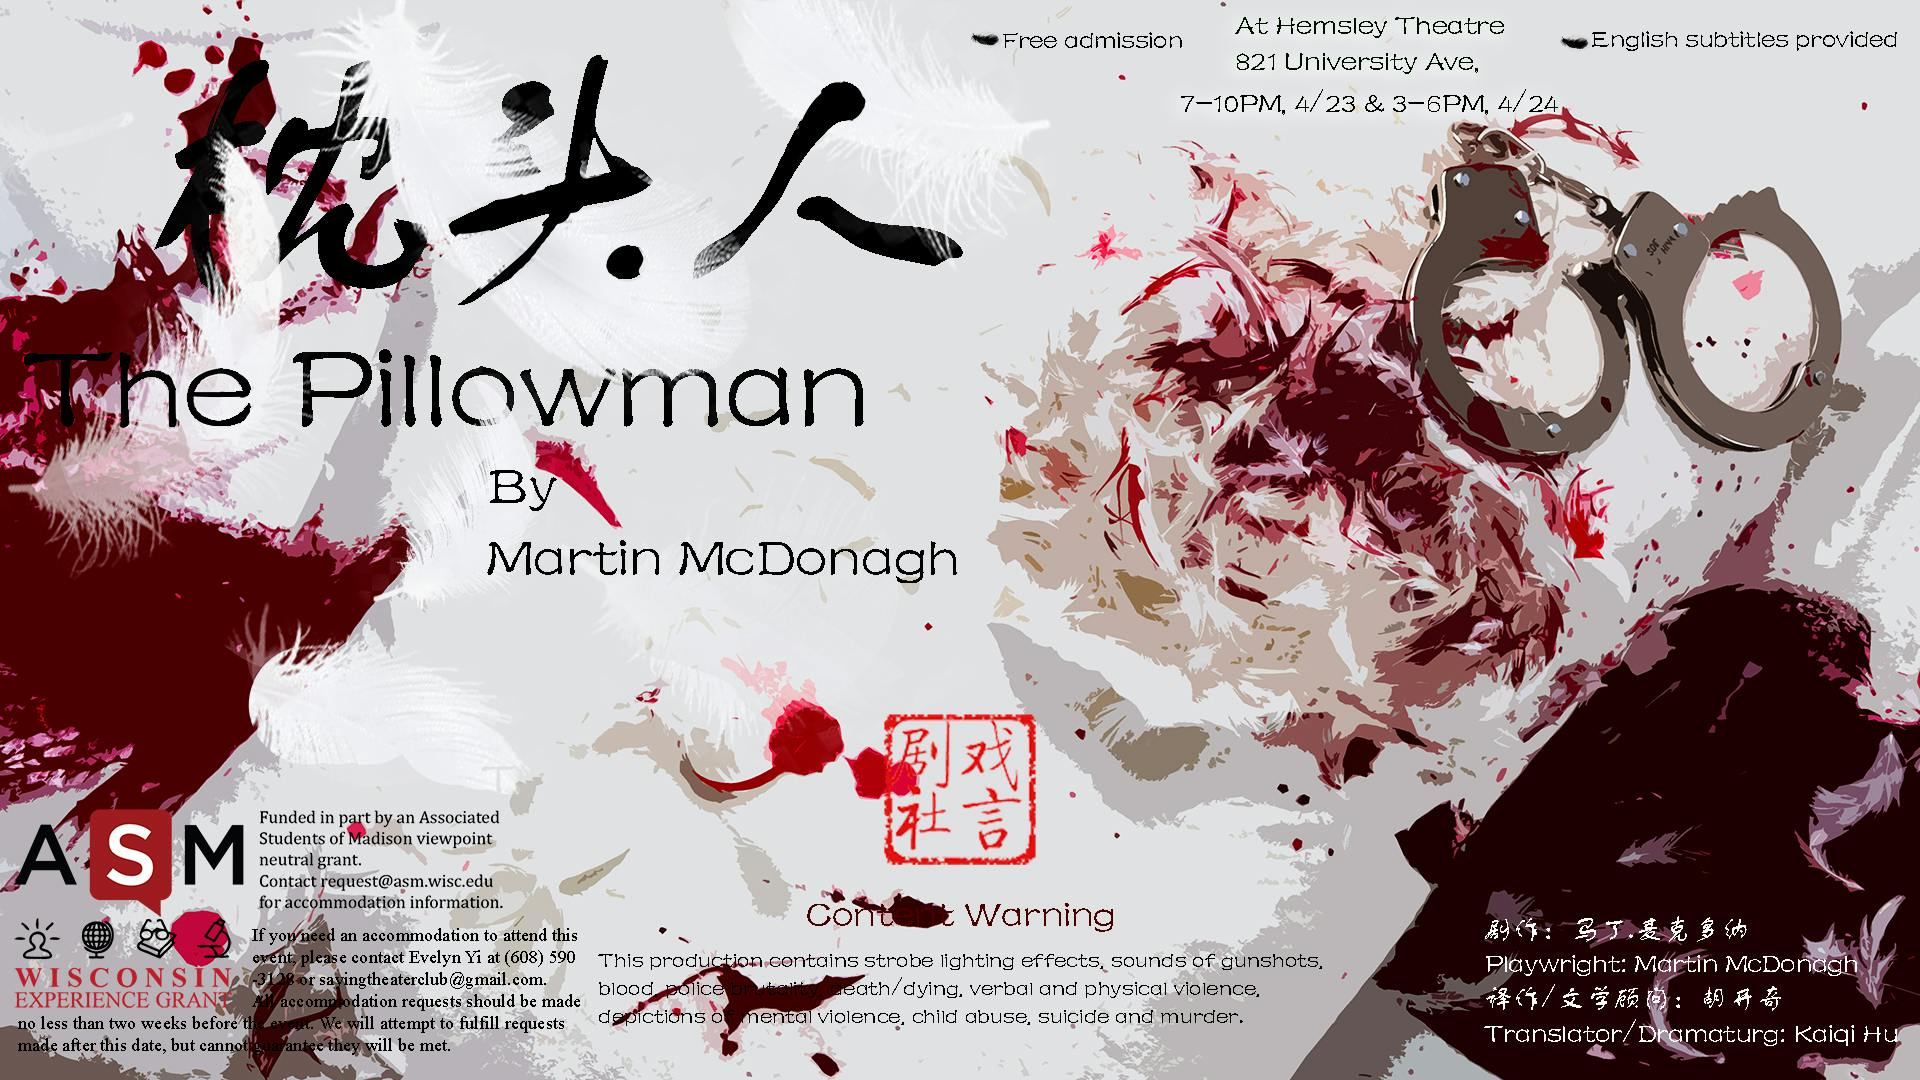 The Pillowman - Saying Theatre cover image